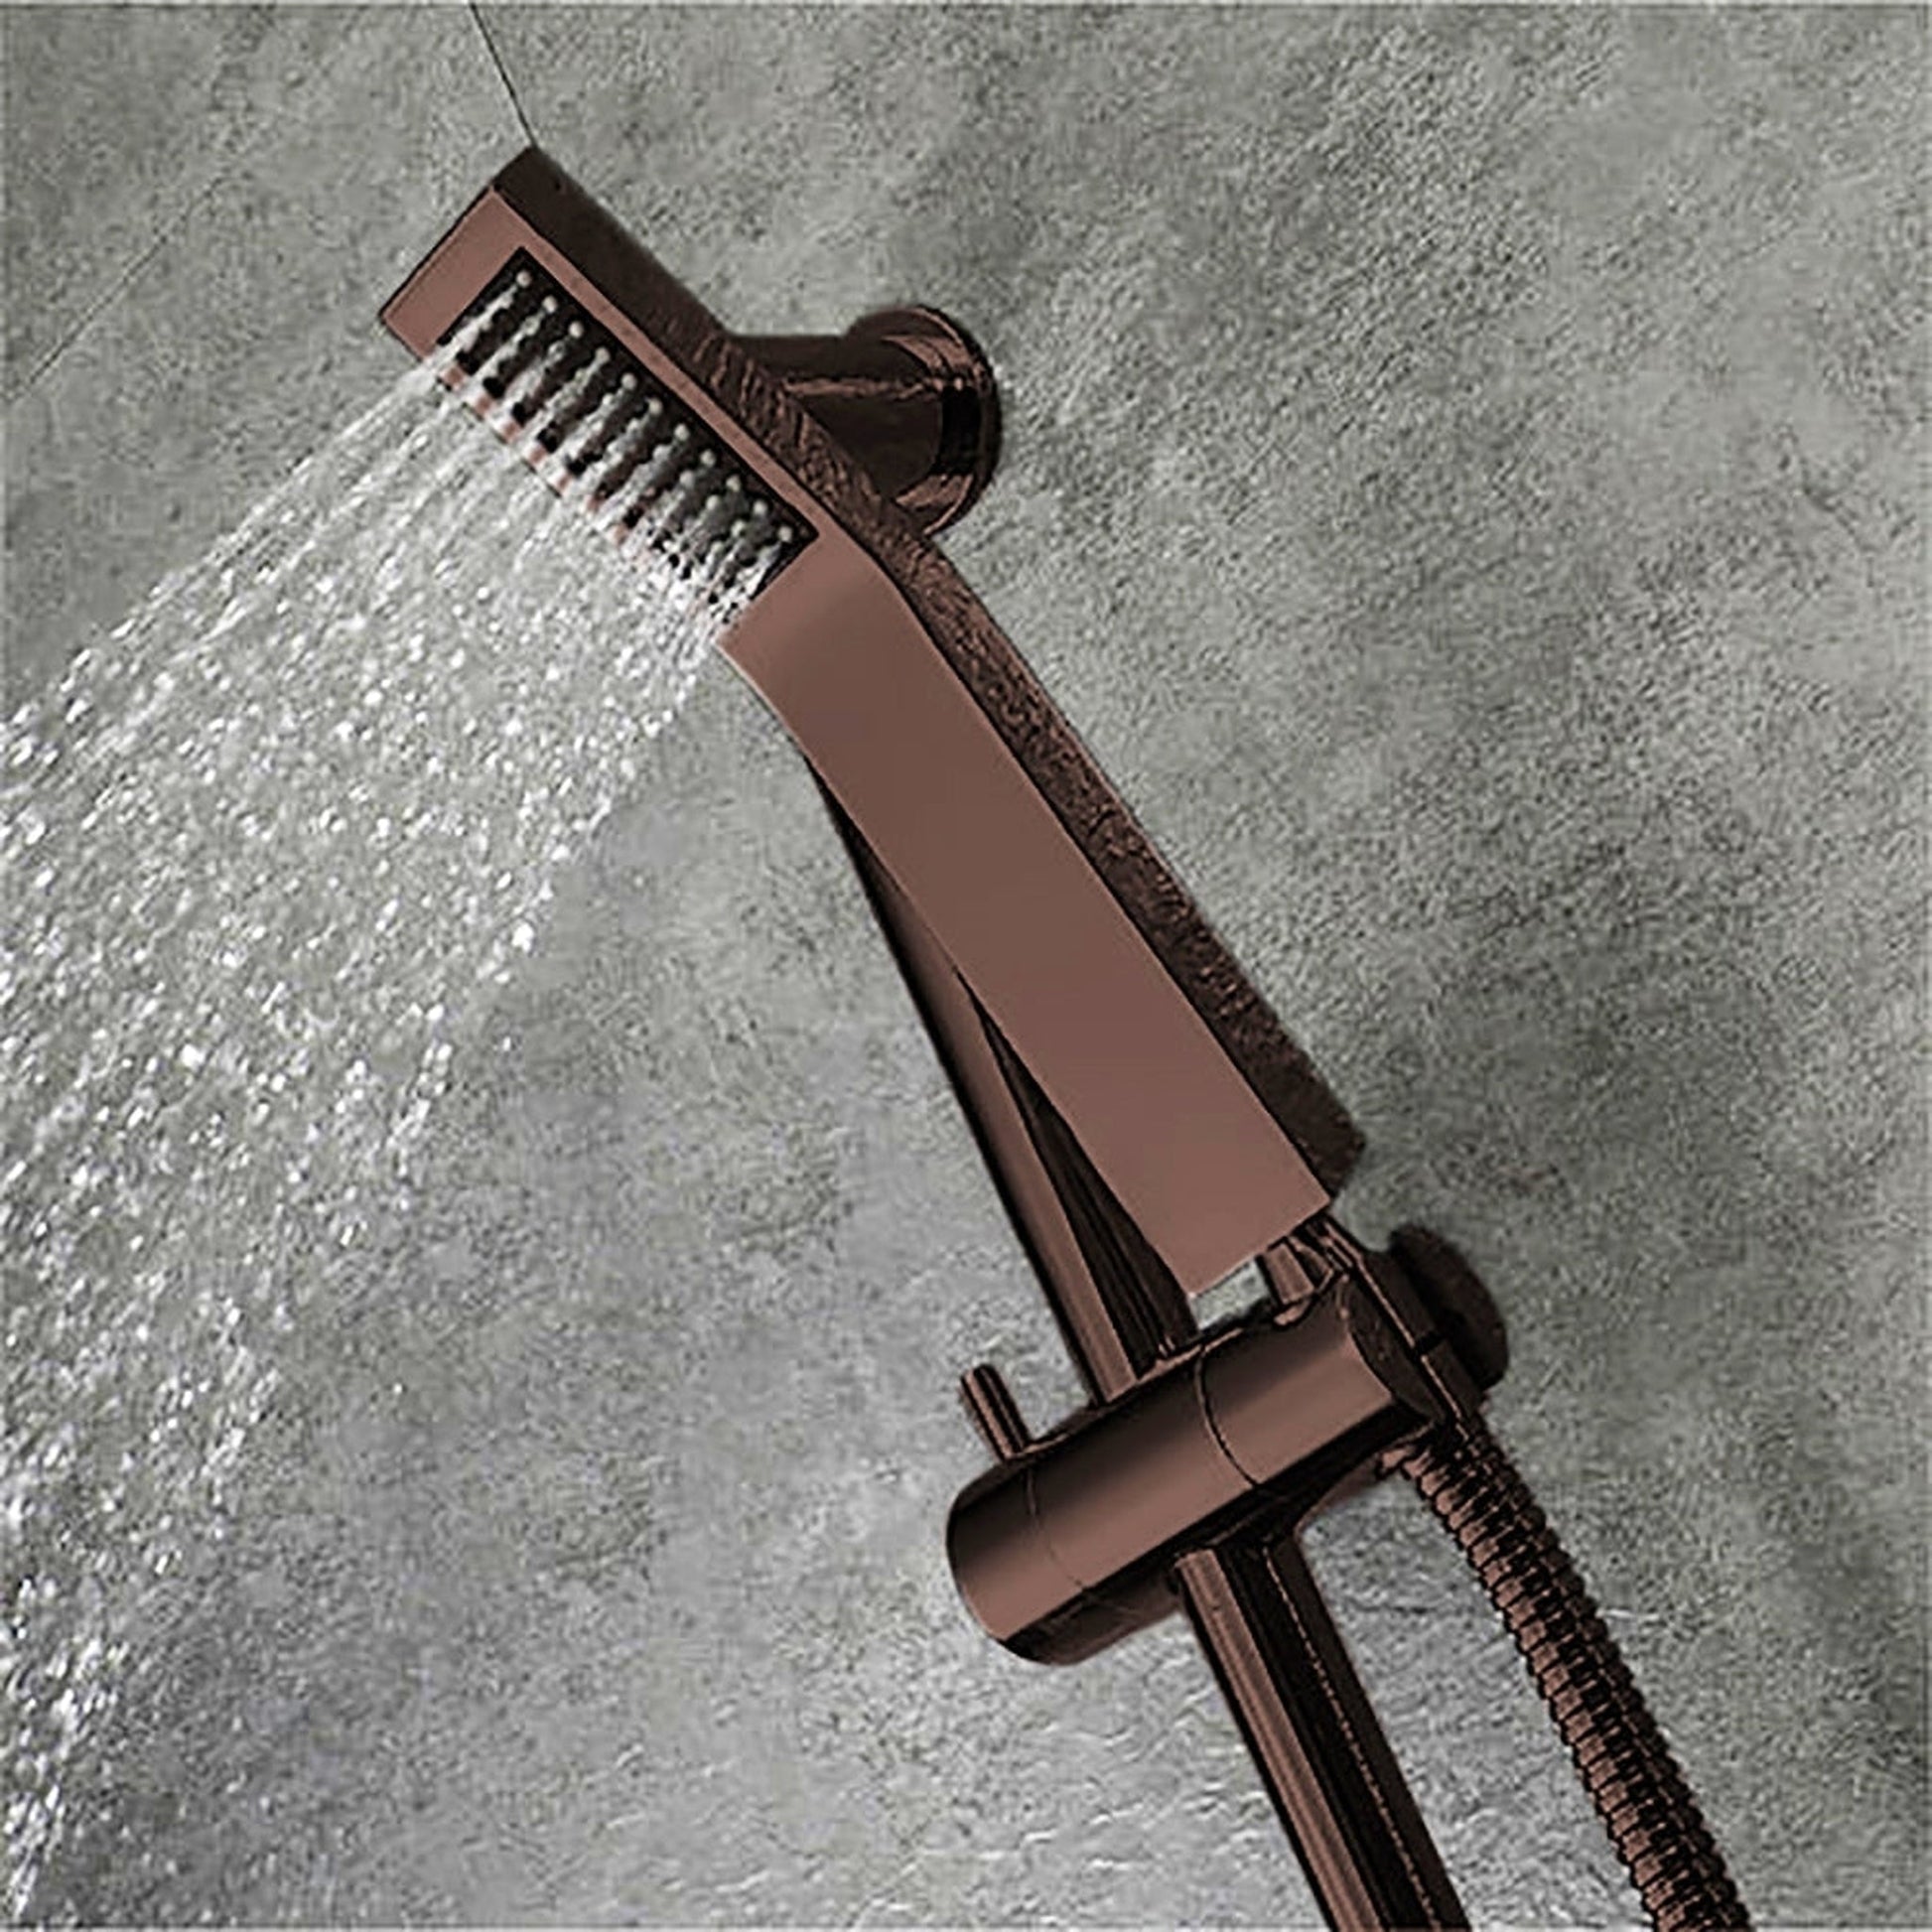 https://usbathstore.com/cdn/shop/products/Fontana-Creative-Luxury-Light-Oil-Rubbed-Bronze-Rectangular-Ceiling-Mounted-Rainfall-Smart-Shower-System-With-LED-Touch-Control-and-Hand-Shower-3.jpg?v=1678135136&width=1946